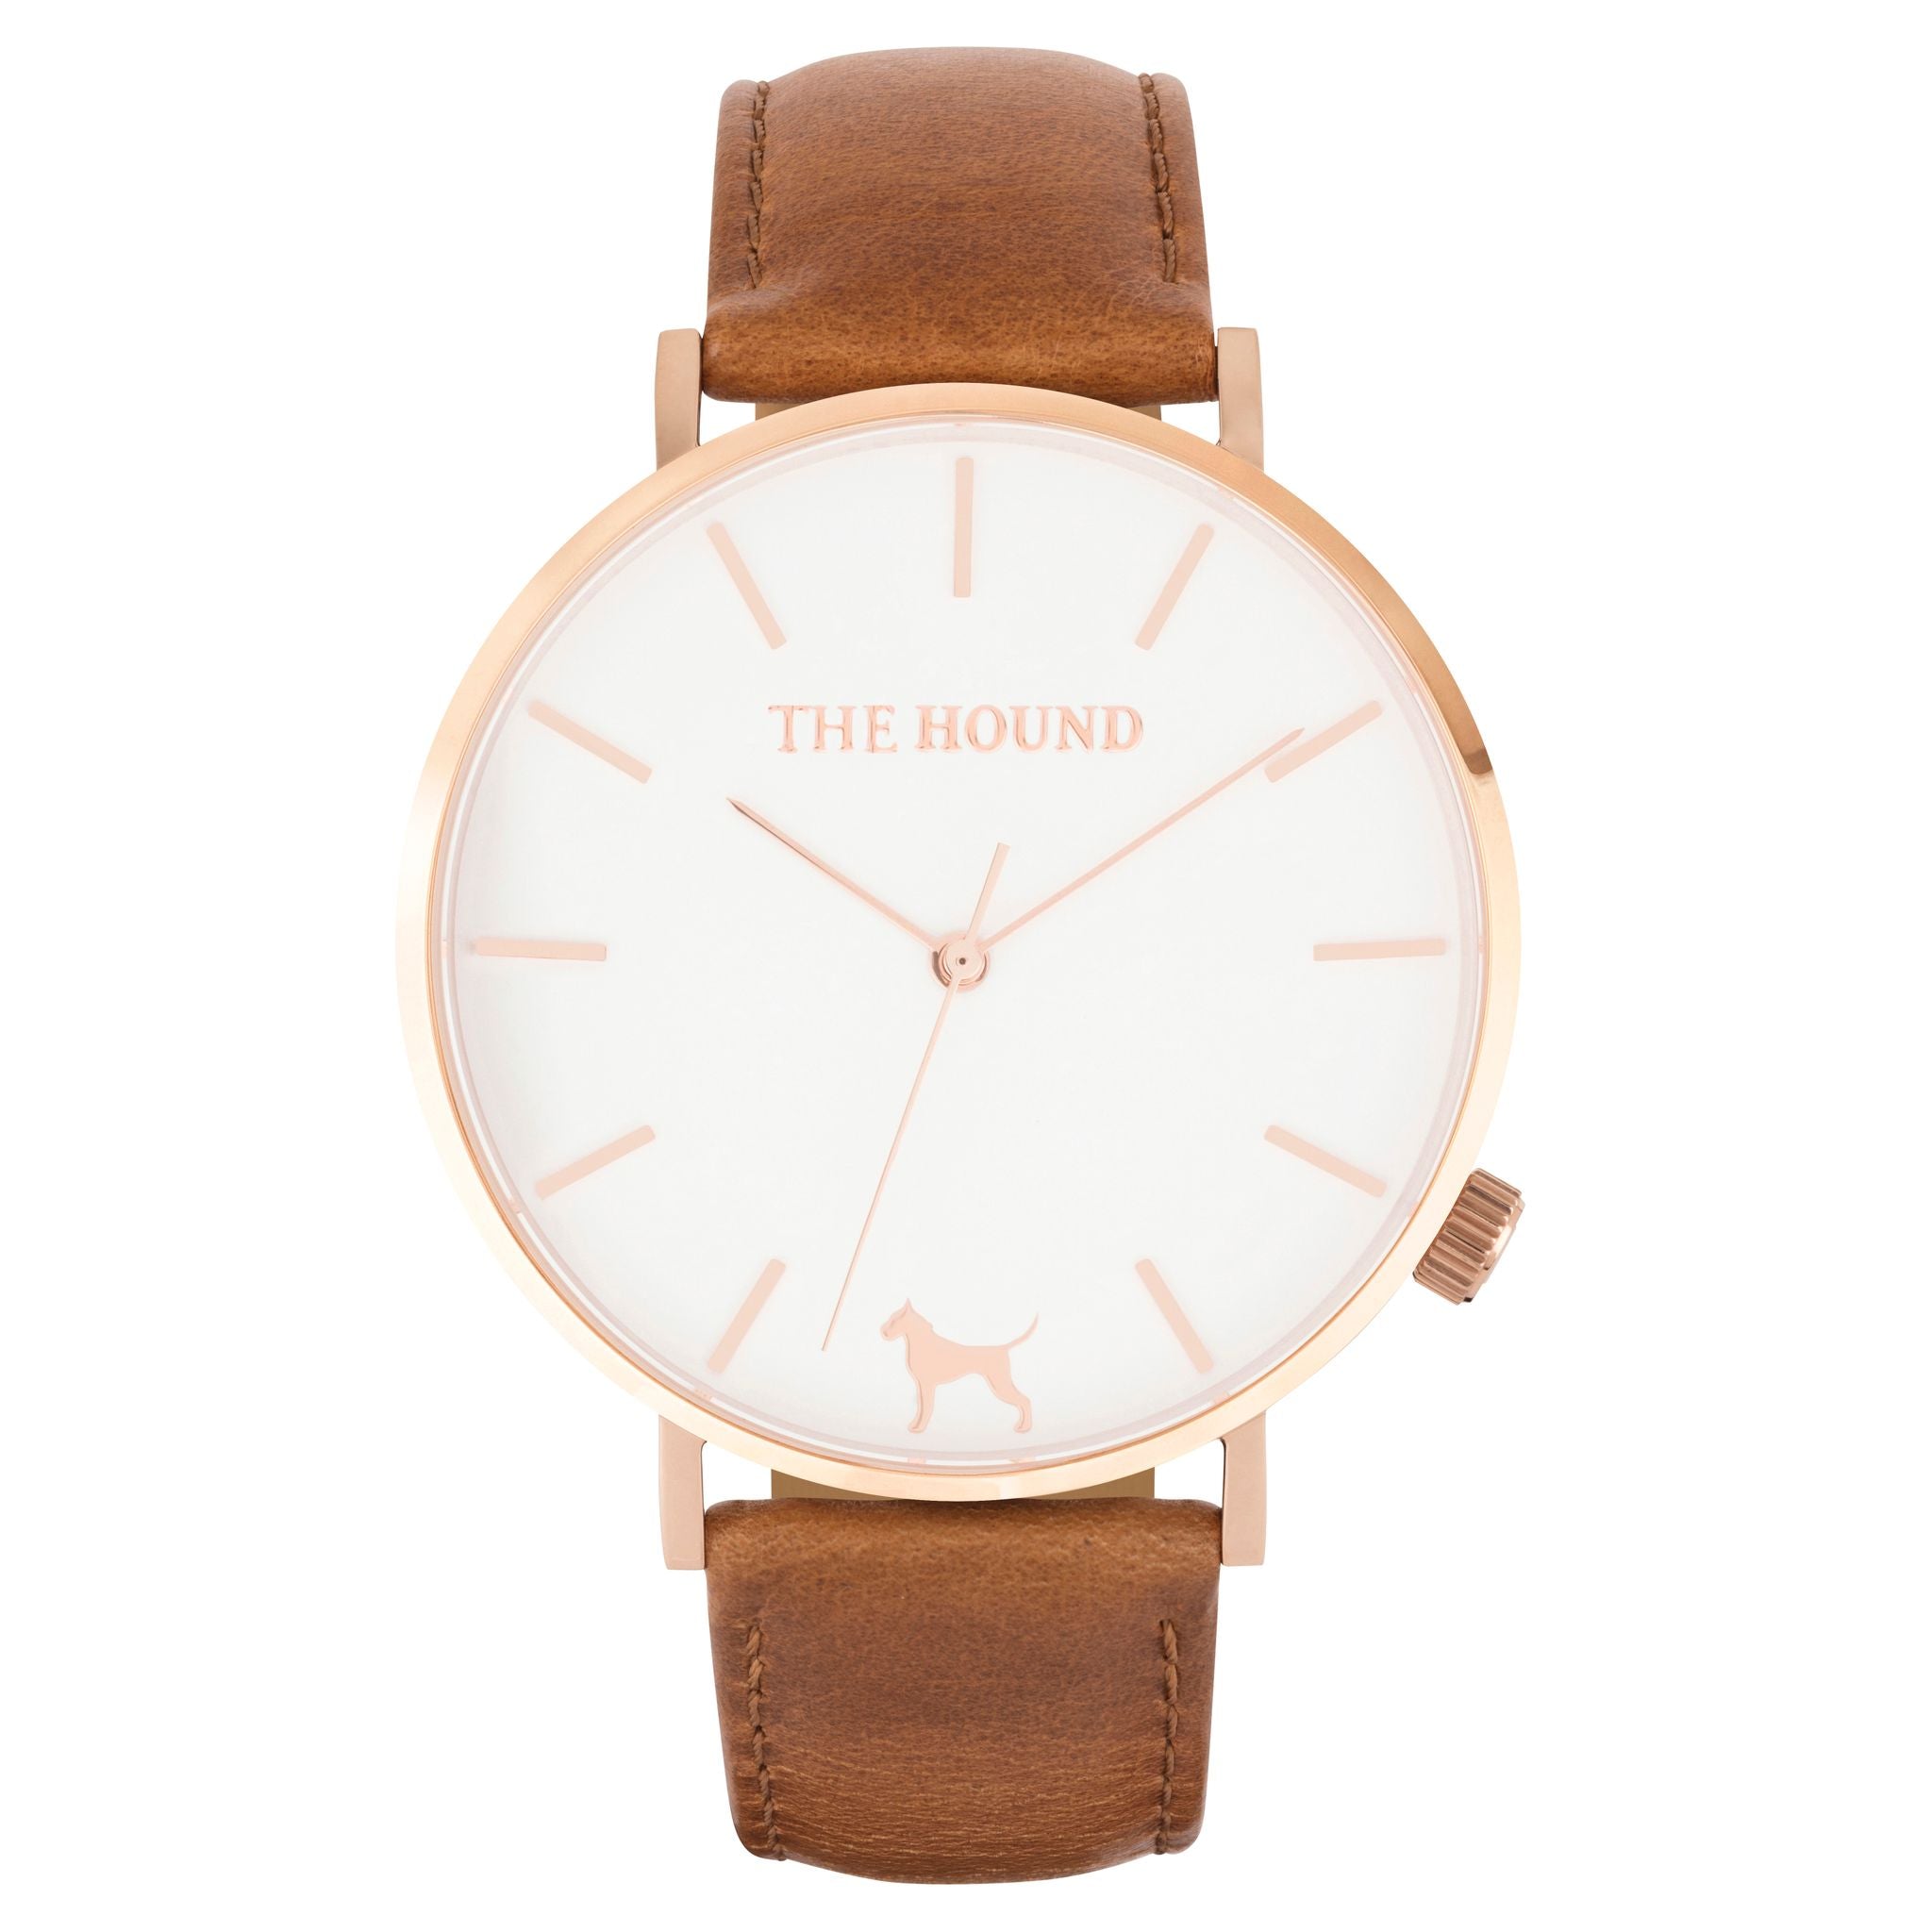 Rose gold & white face watch with tan leather